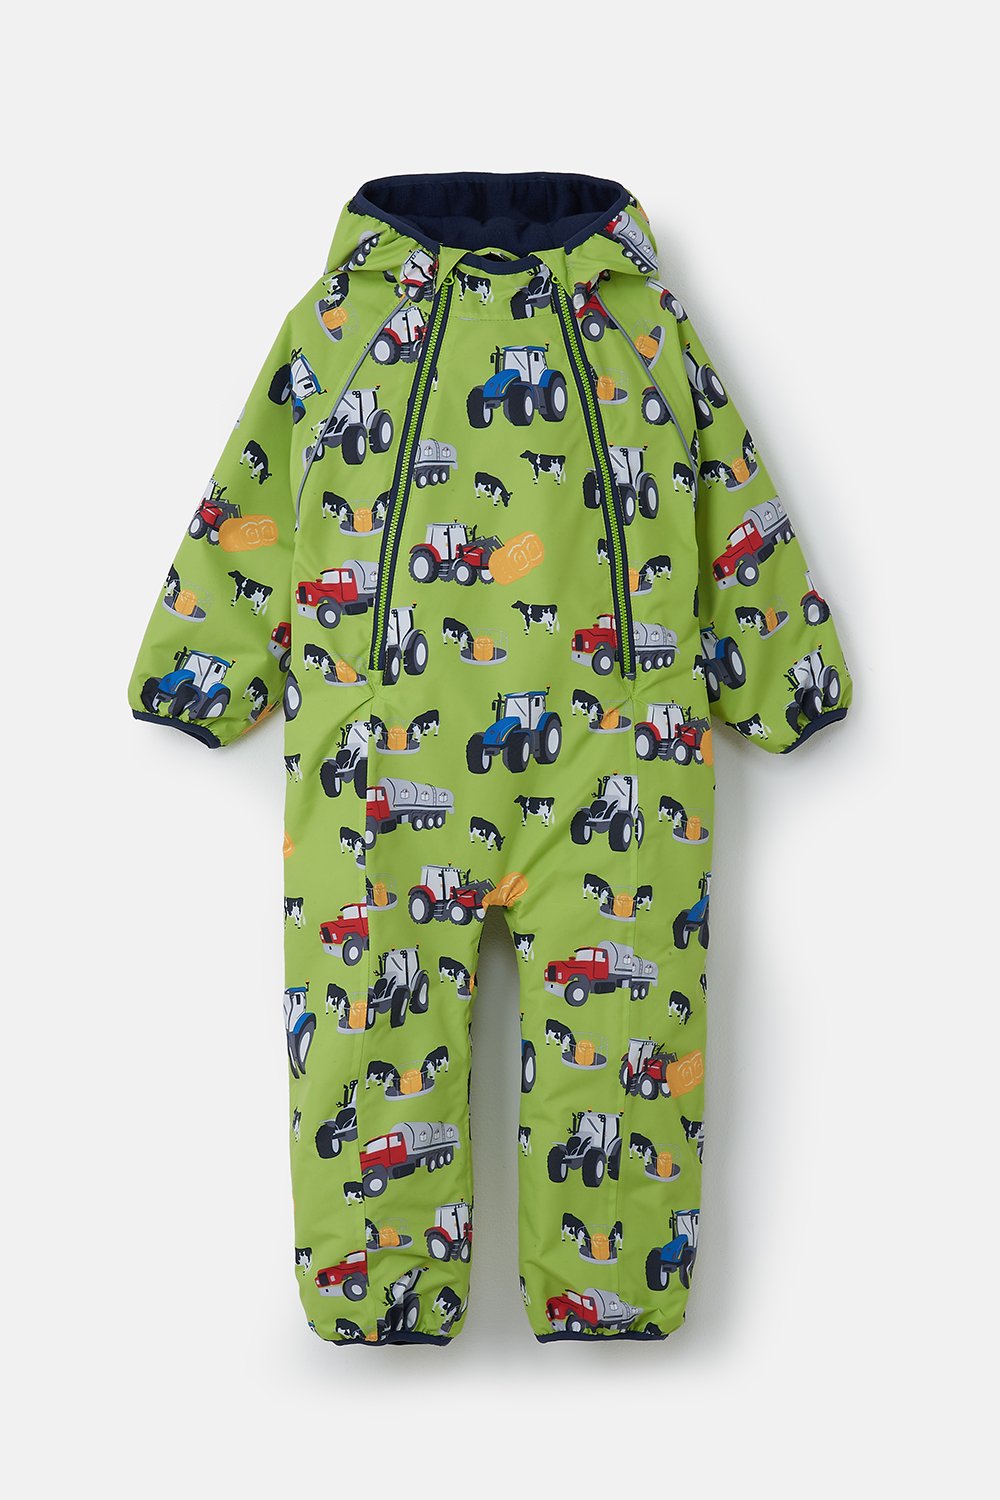 Lighthouse Jamie Puddle Suit - Lime Green Farm Yard